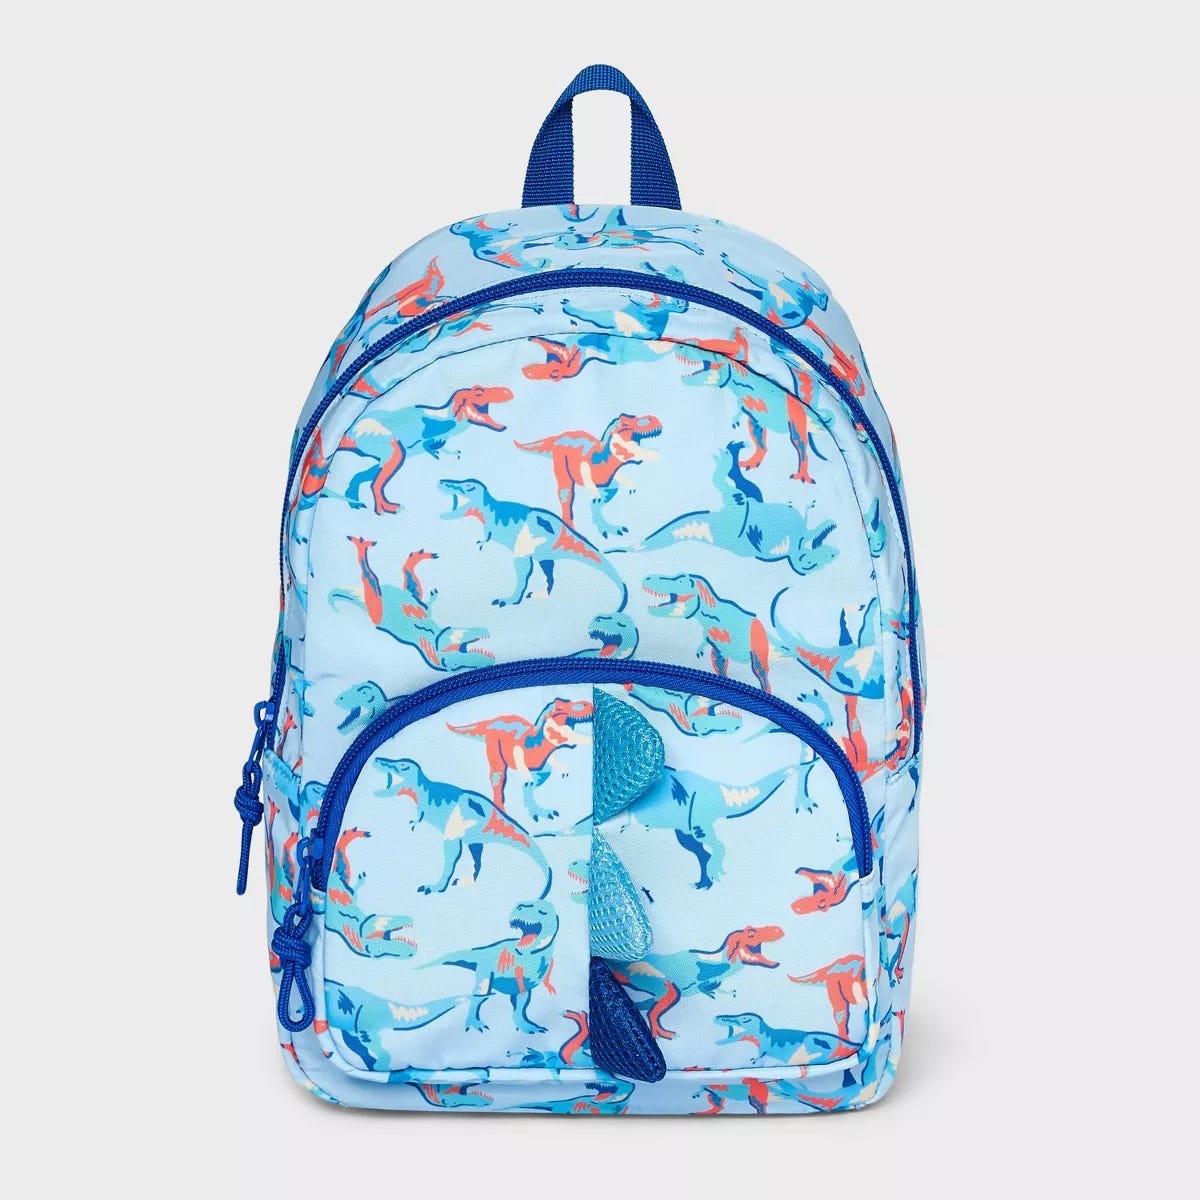 A light blue backpack with red and blue dinosaur prints.